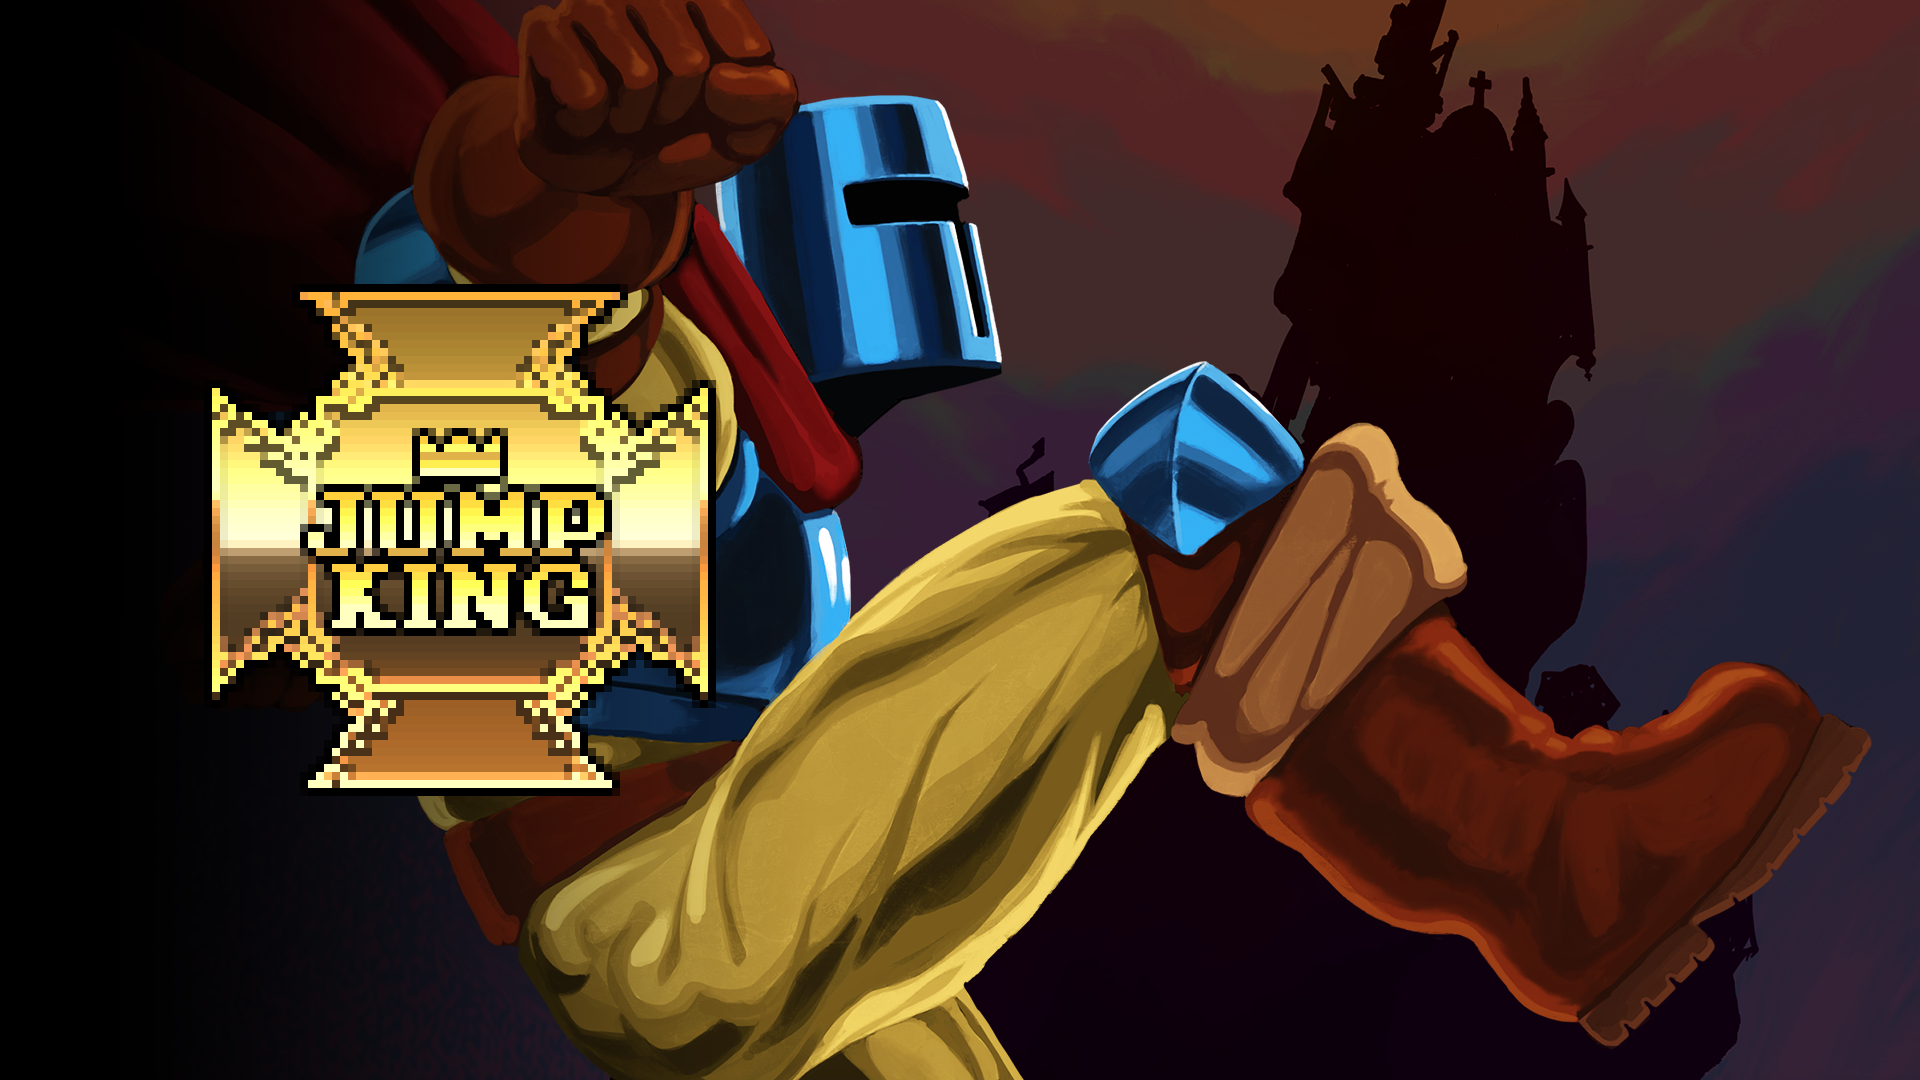 Icon for Jump King